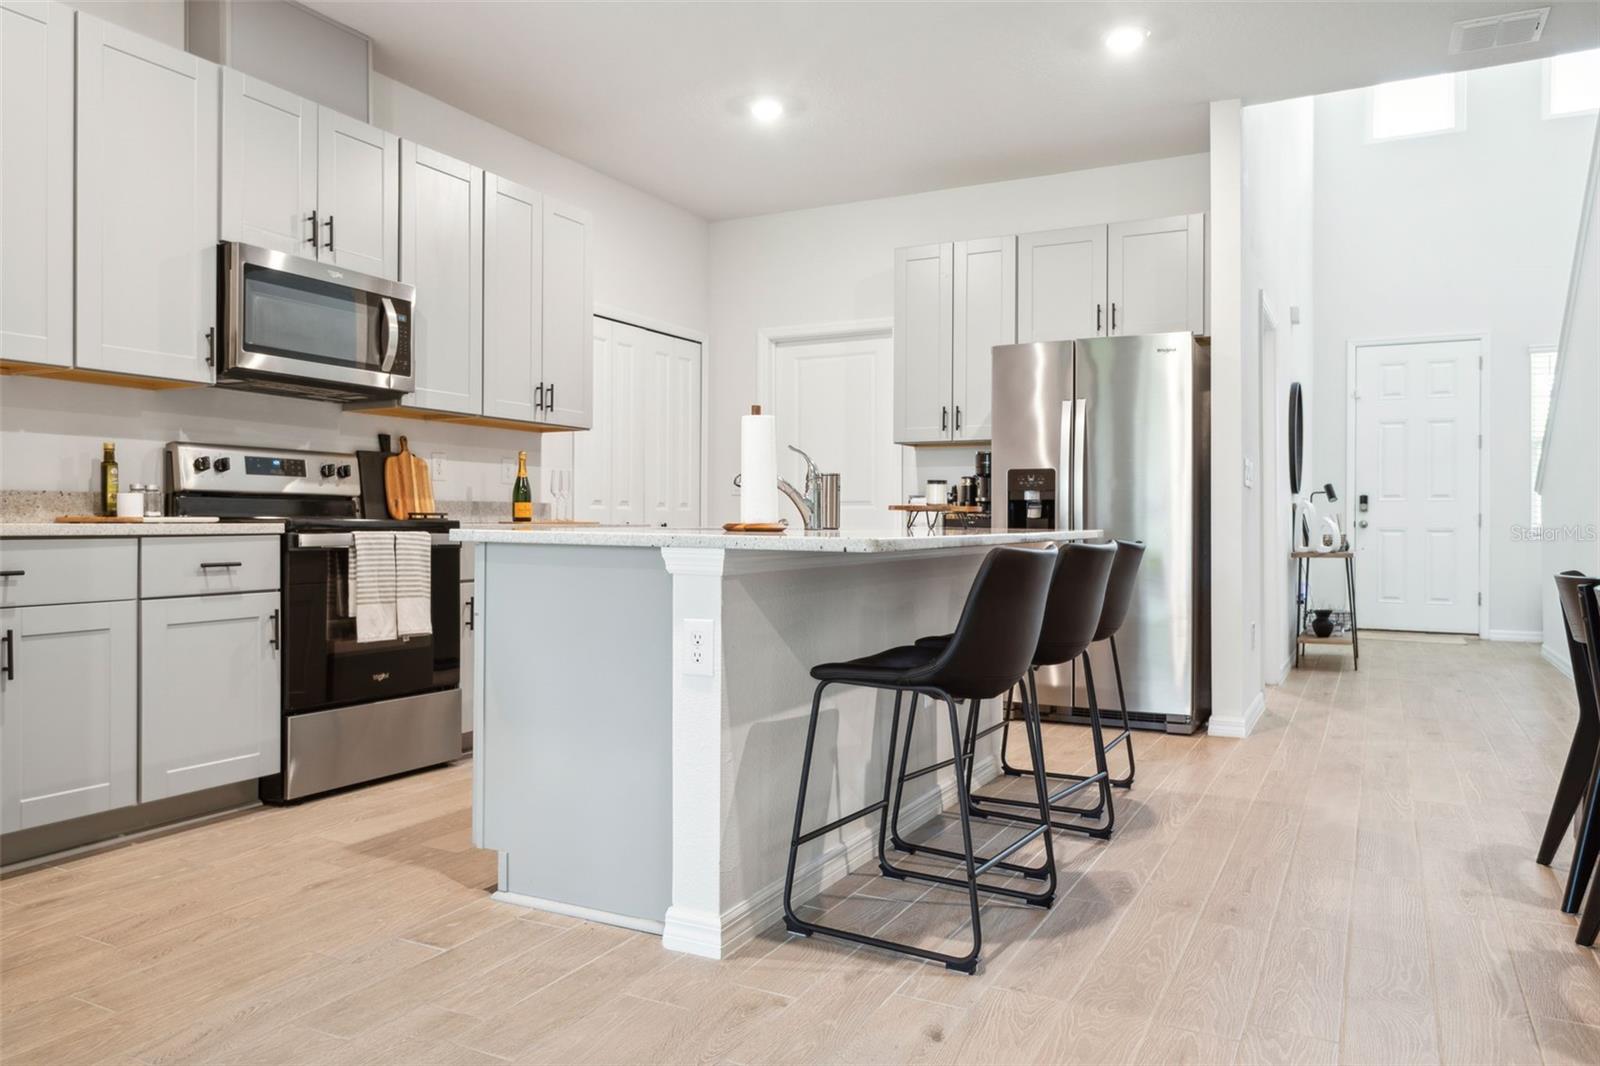 Your kitchen features stainless steel appliances, island seating for 4, quartz countertops, and a closet pantry with laundry room access & the garage.